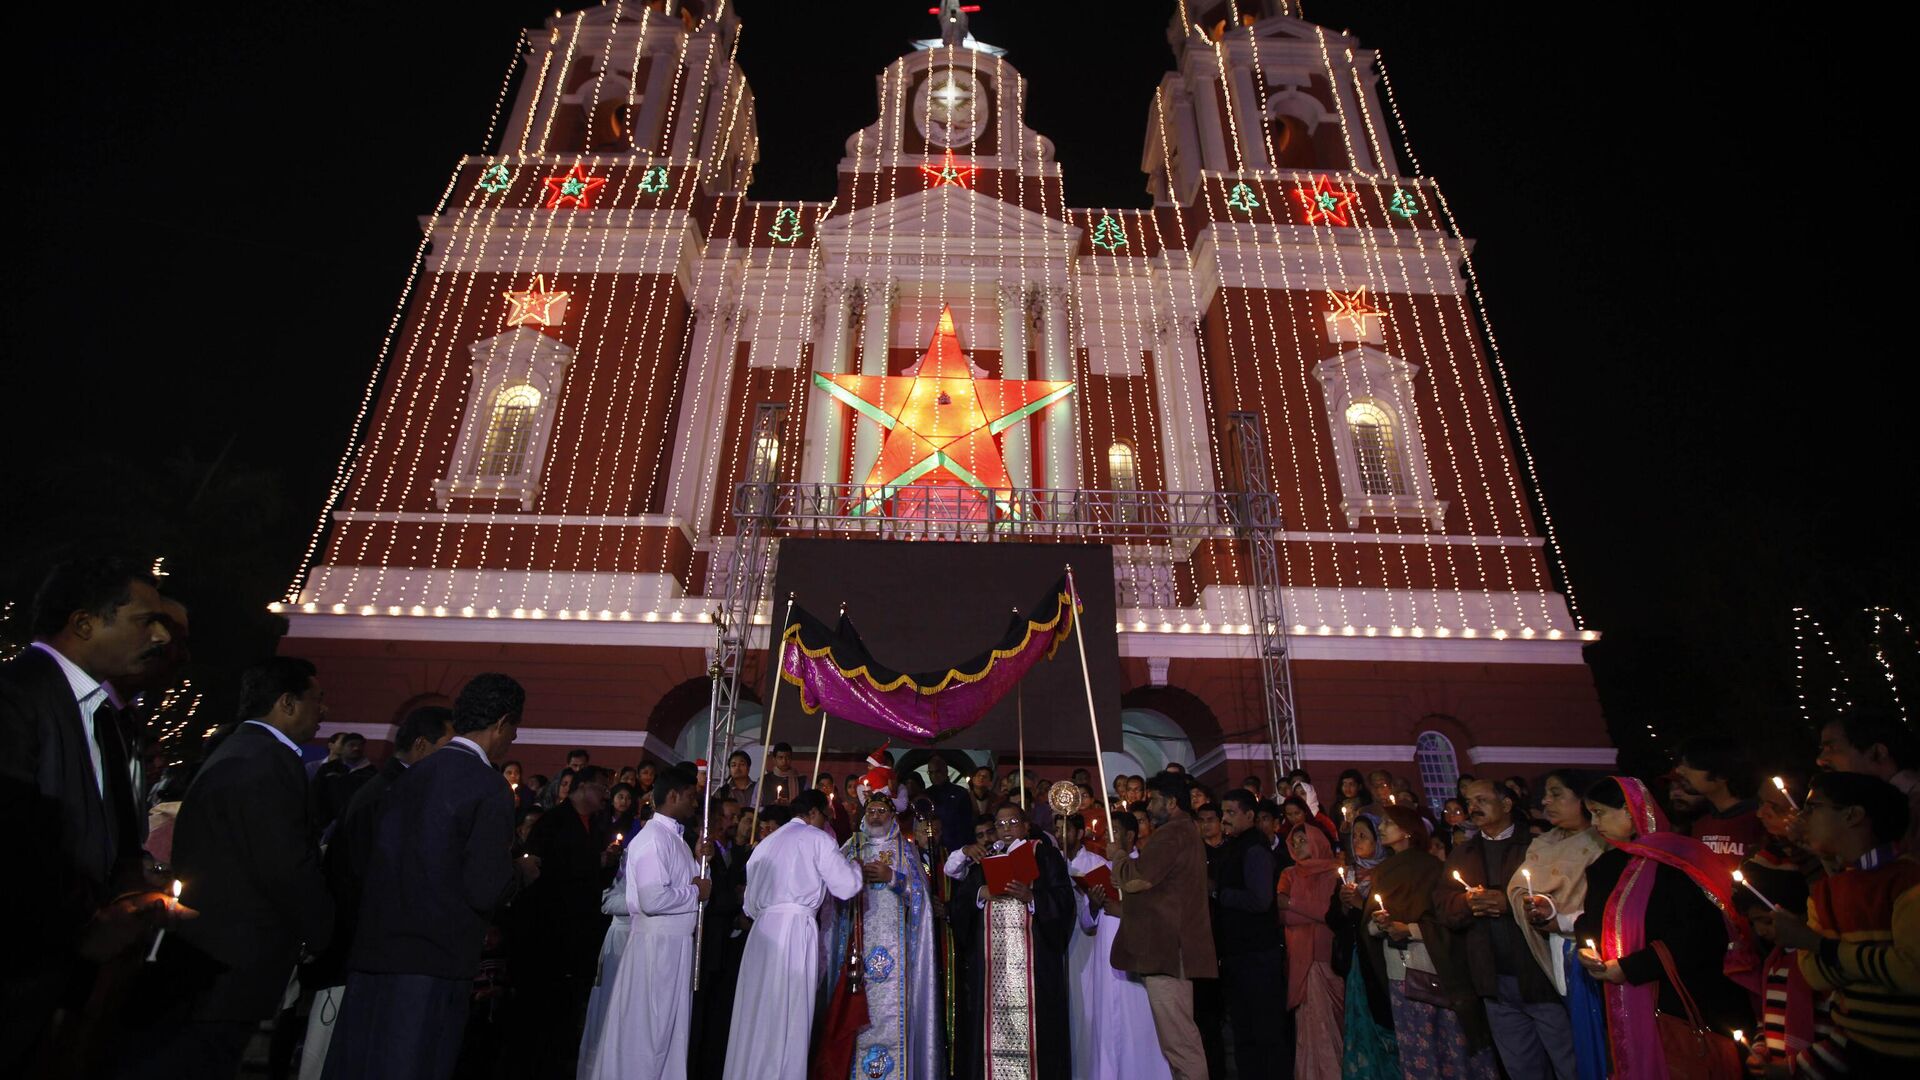 Christian religious heads perform Syro-Malankara Rite, a ritual, at the illuminated Sacred Heart's Cathedral on Christmas Eve in New Delhi, India, Tuesday, Dec. 24, 2013. Though Hindus and Muslims comprise the majority of the population in India, Christmas is celebrated with much fanfare. - Sputnik भारत, 1920, 15.09.2023